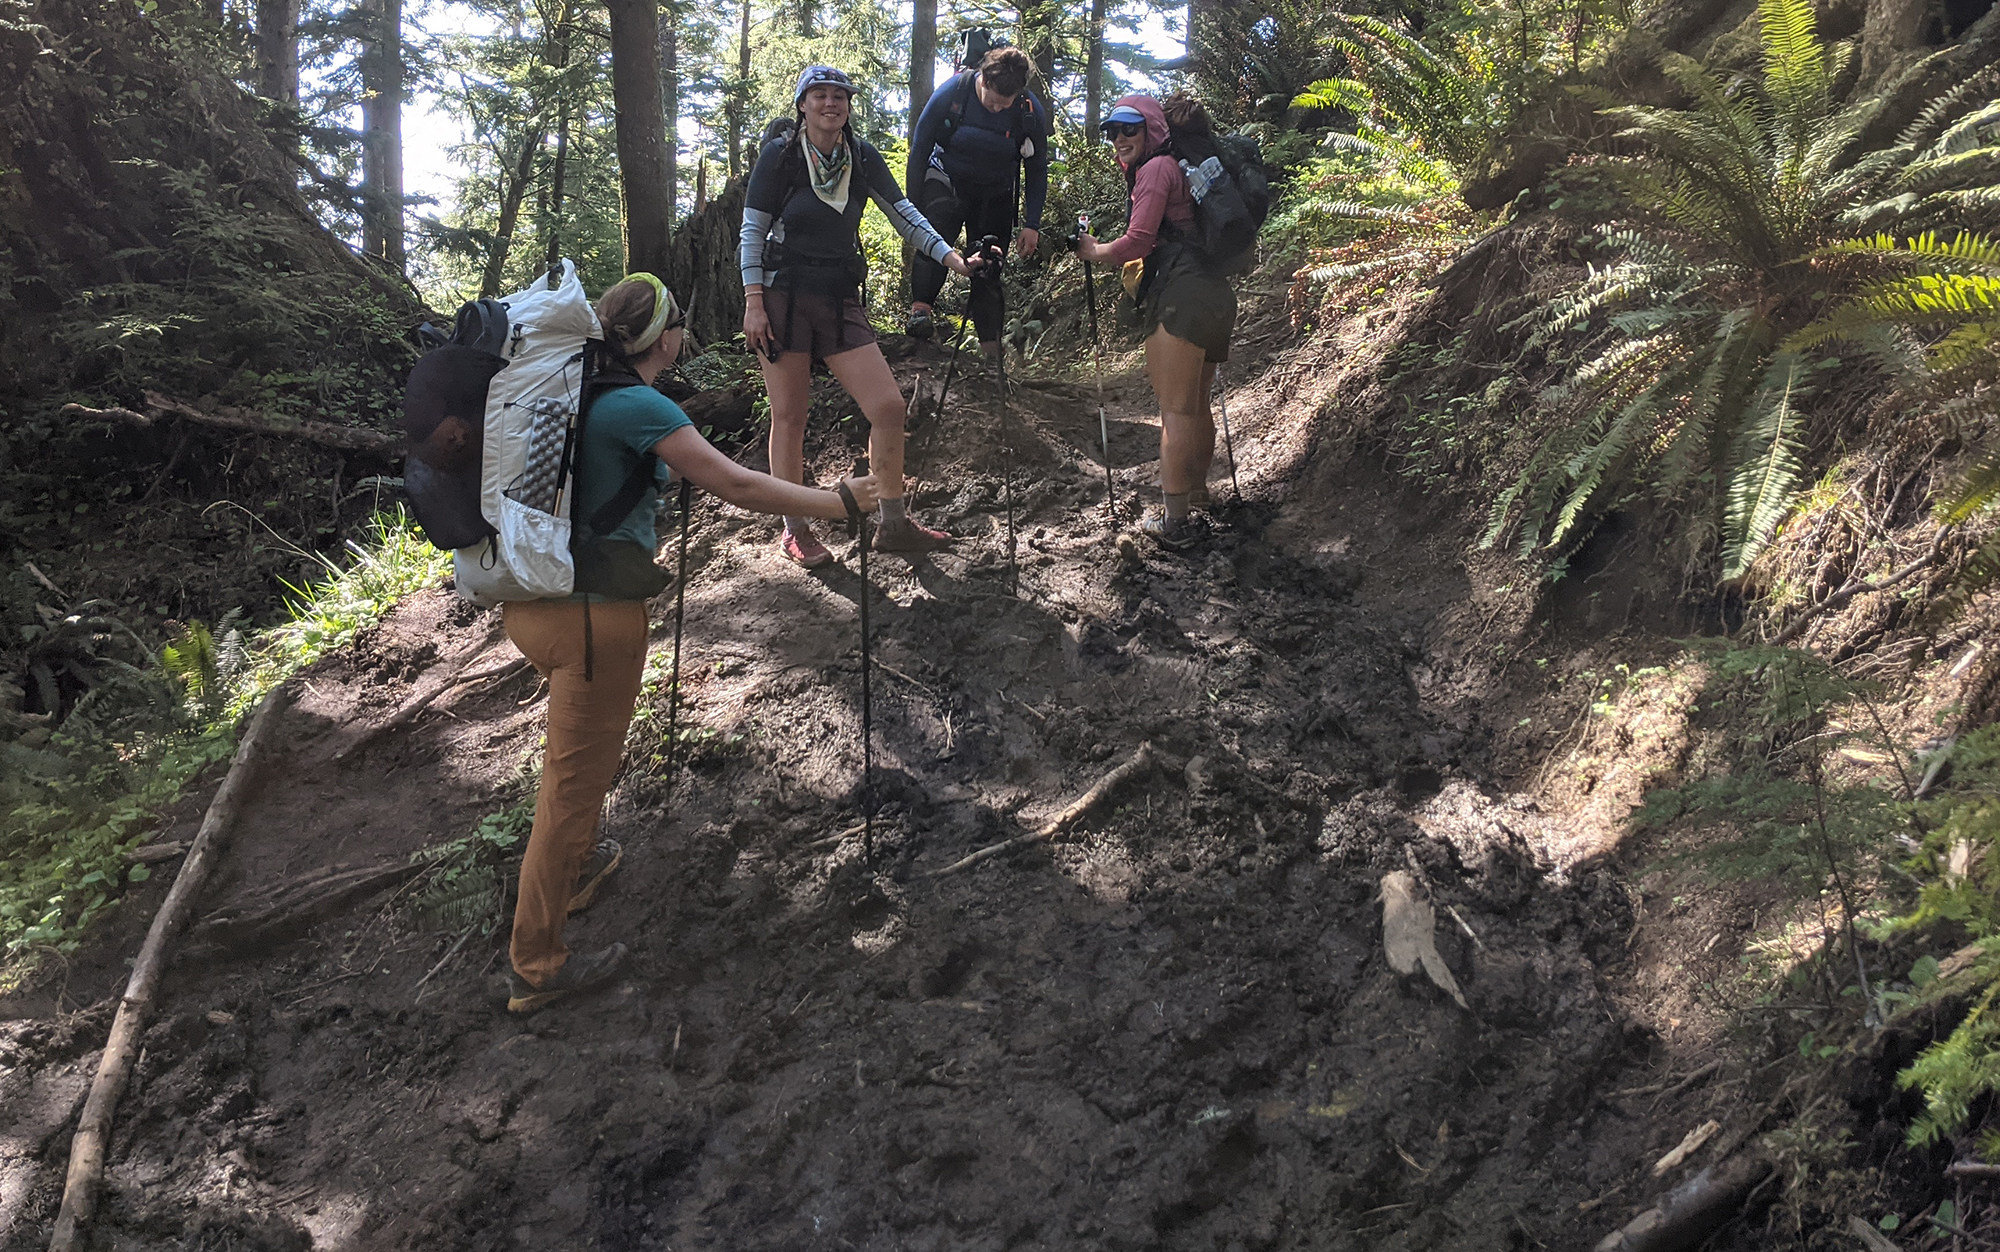 The testing group used the best trekking poles to navigate large, muddy up-hill sections of trail.